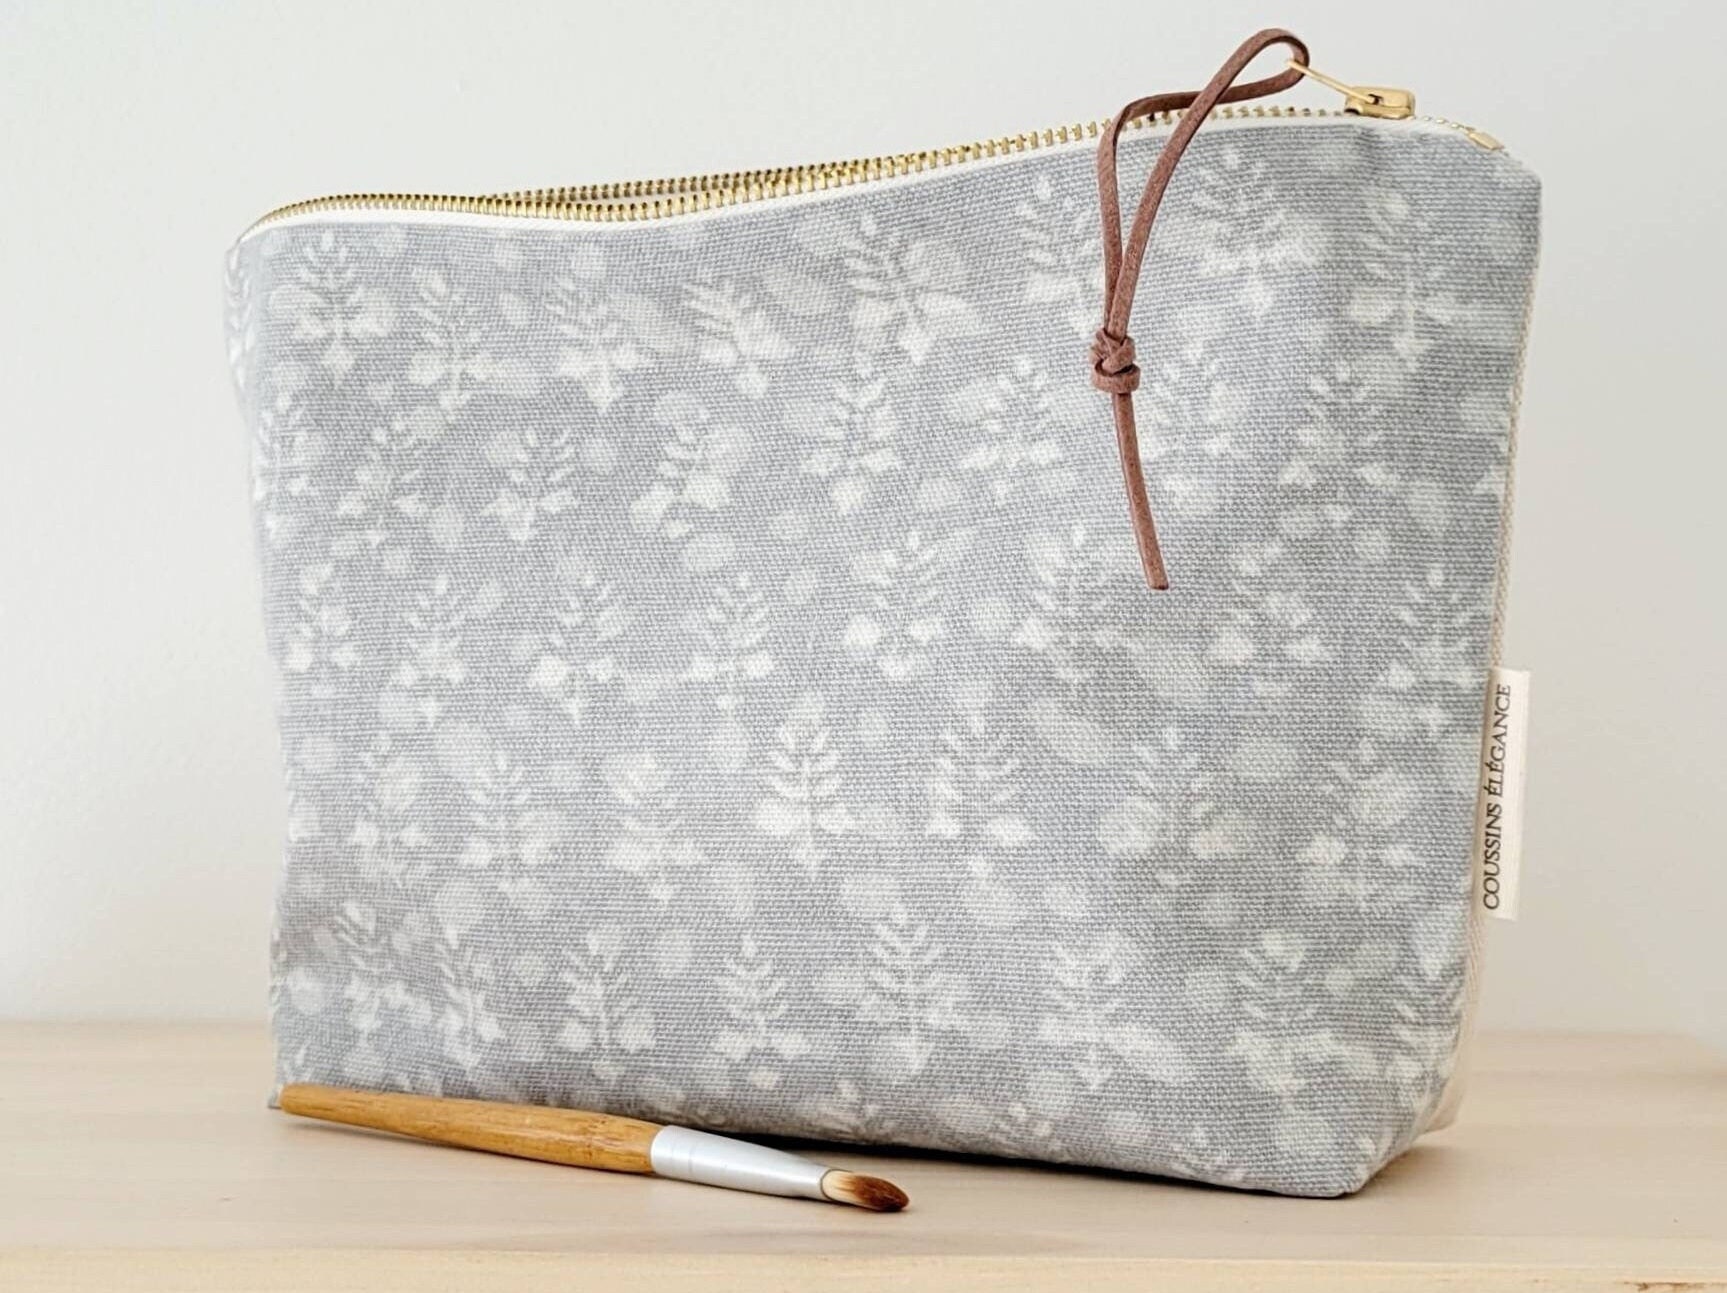 Creamy White Makeup Bag, Unique Cosmetic Bag, Minimalist Pouch, Tone on  Tone Zip Pouch, Make up Bag Gift, Perfect Gift Women, Teen Girl Gift 